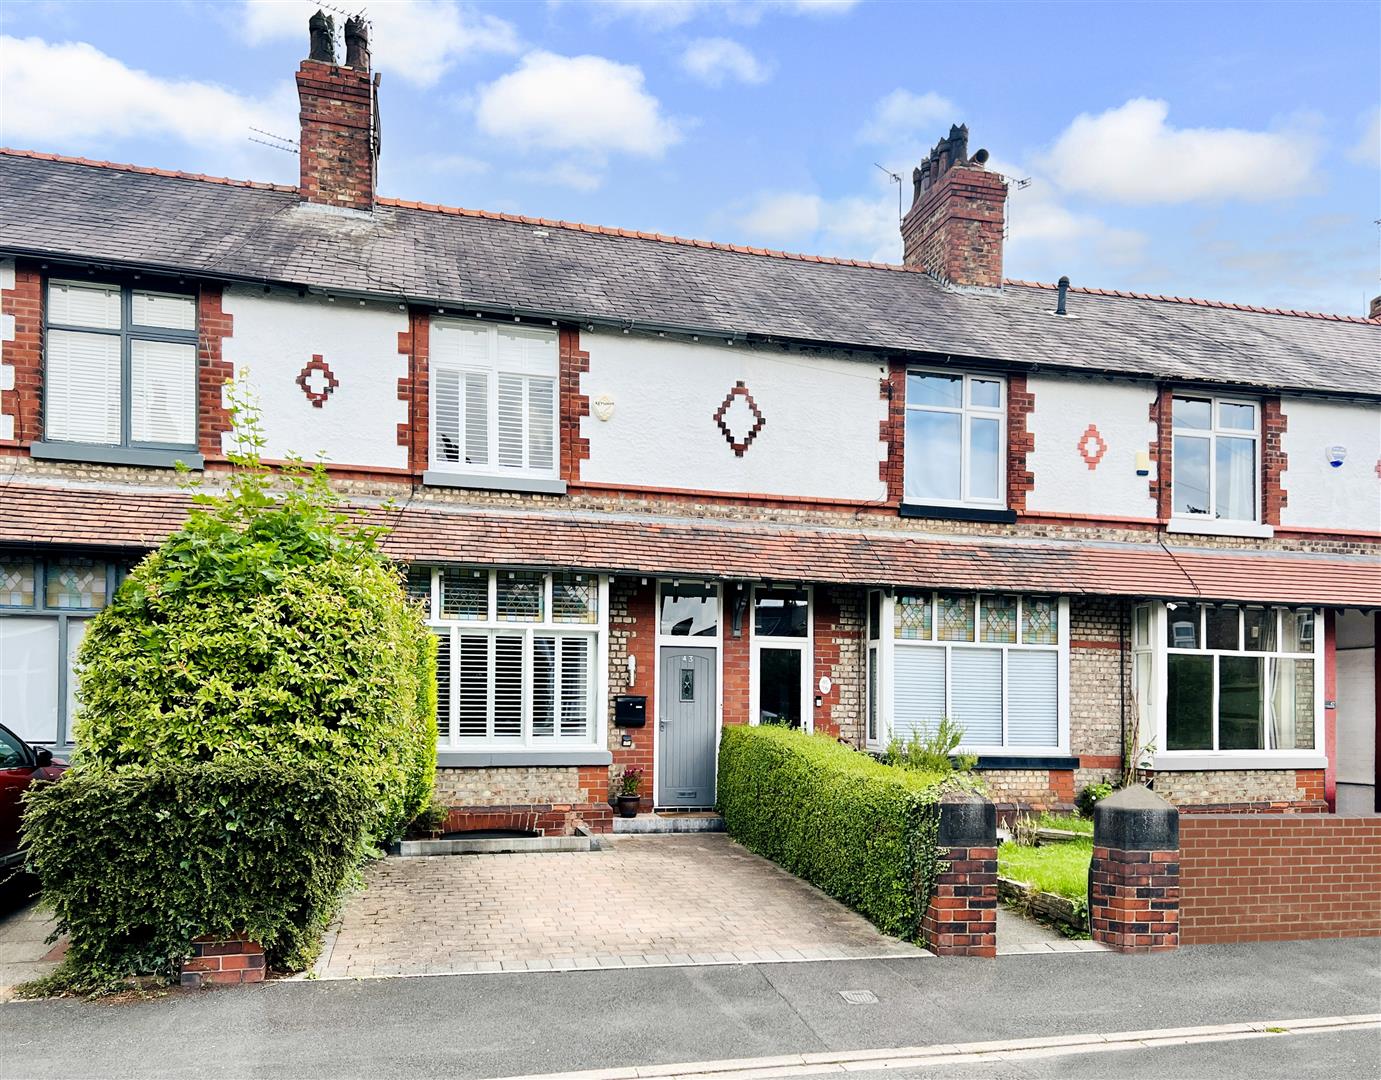 3 bed terraced house for sale in Avon Road, Altrincham - Property Image 1